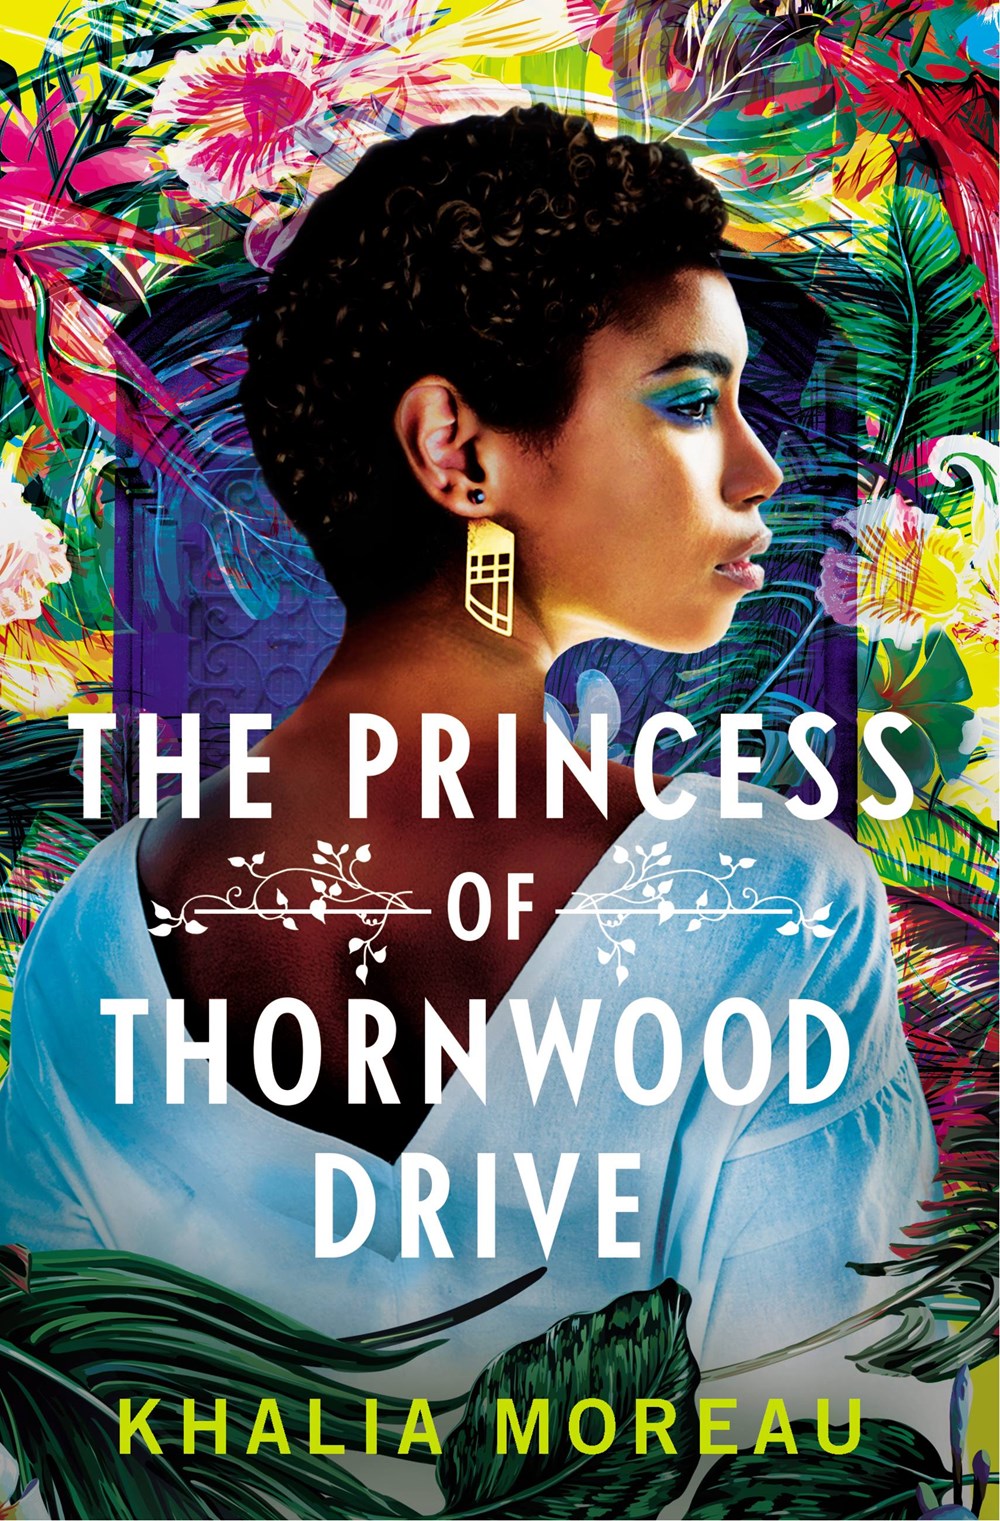 PRE-ORDER: The Princess of Thornwood Drive